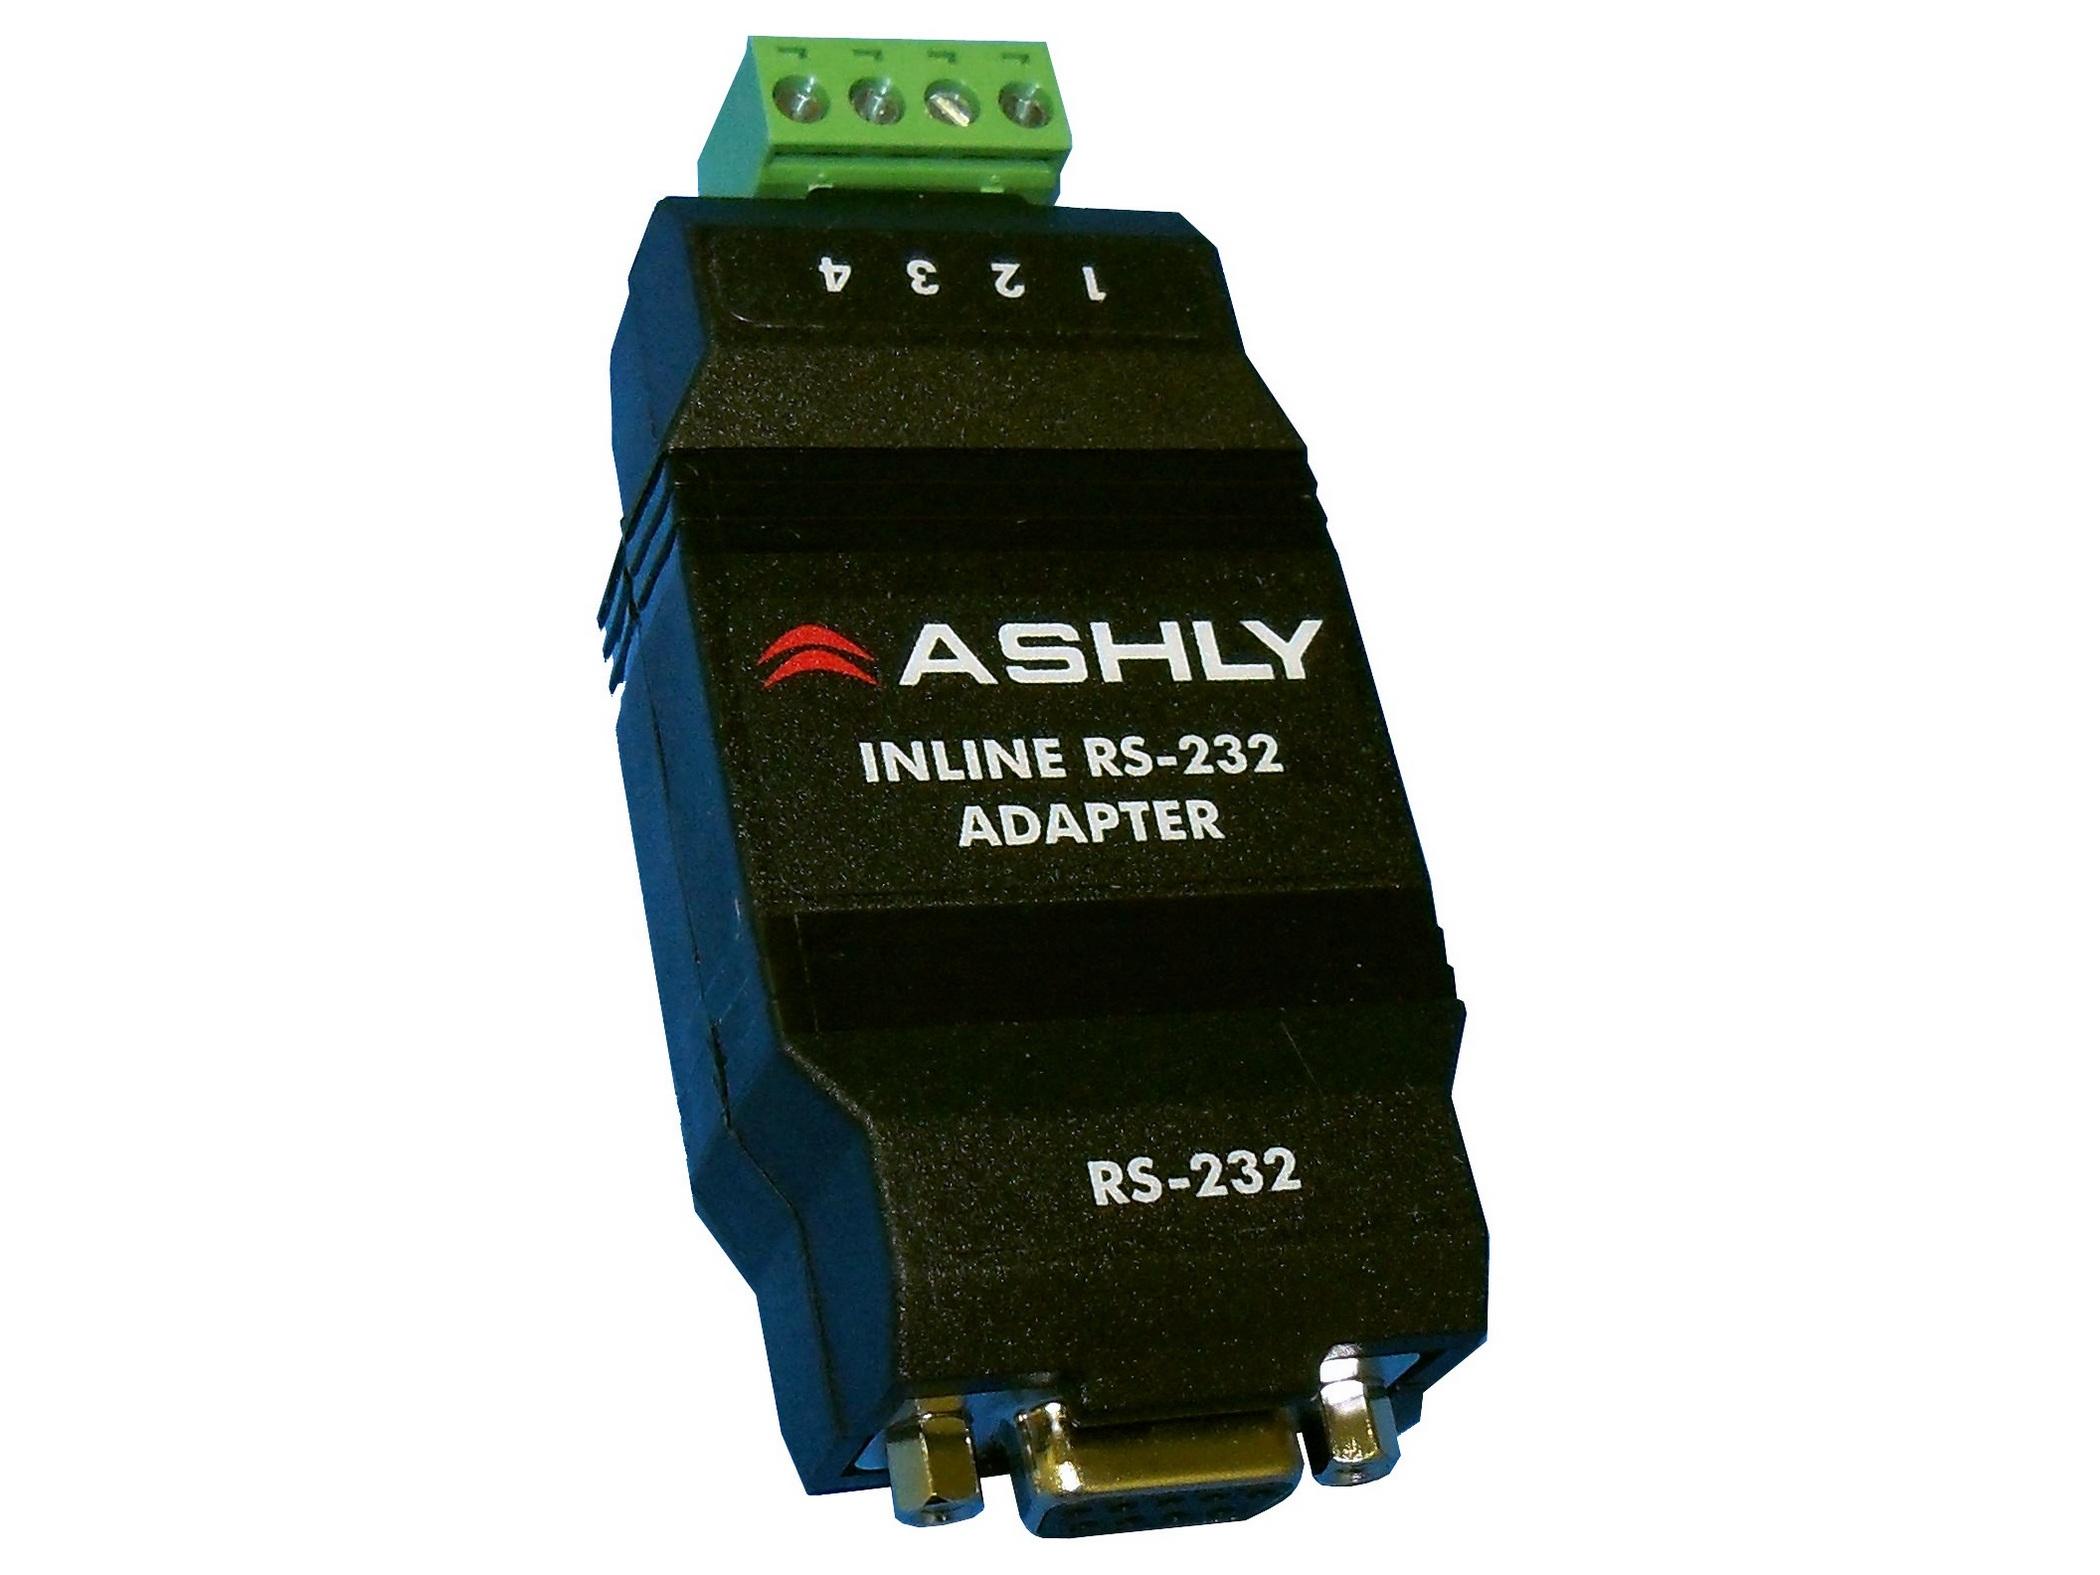 INA-1 In-line RS-232 Adapter provides connectivity to remote data ports by Ashly